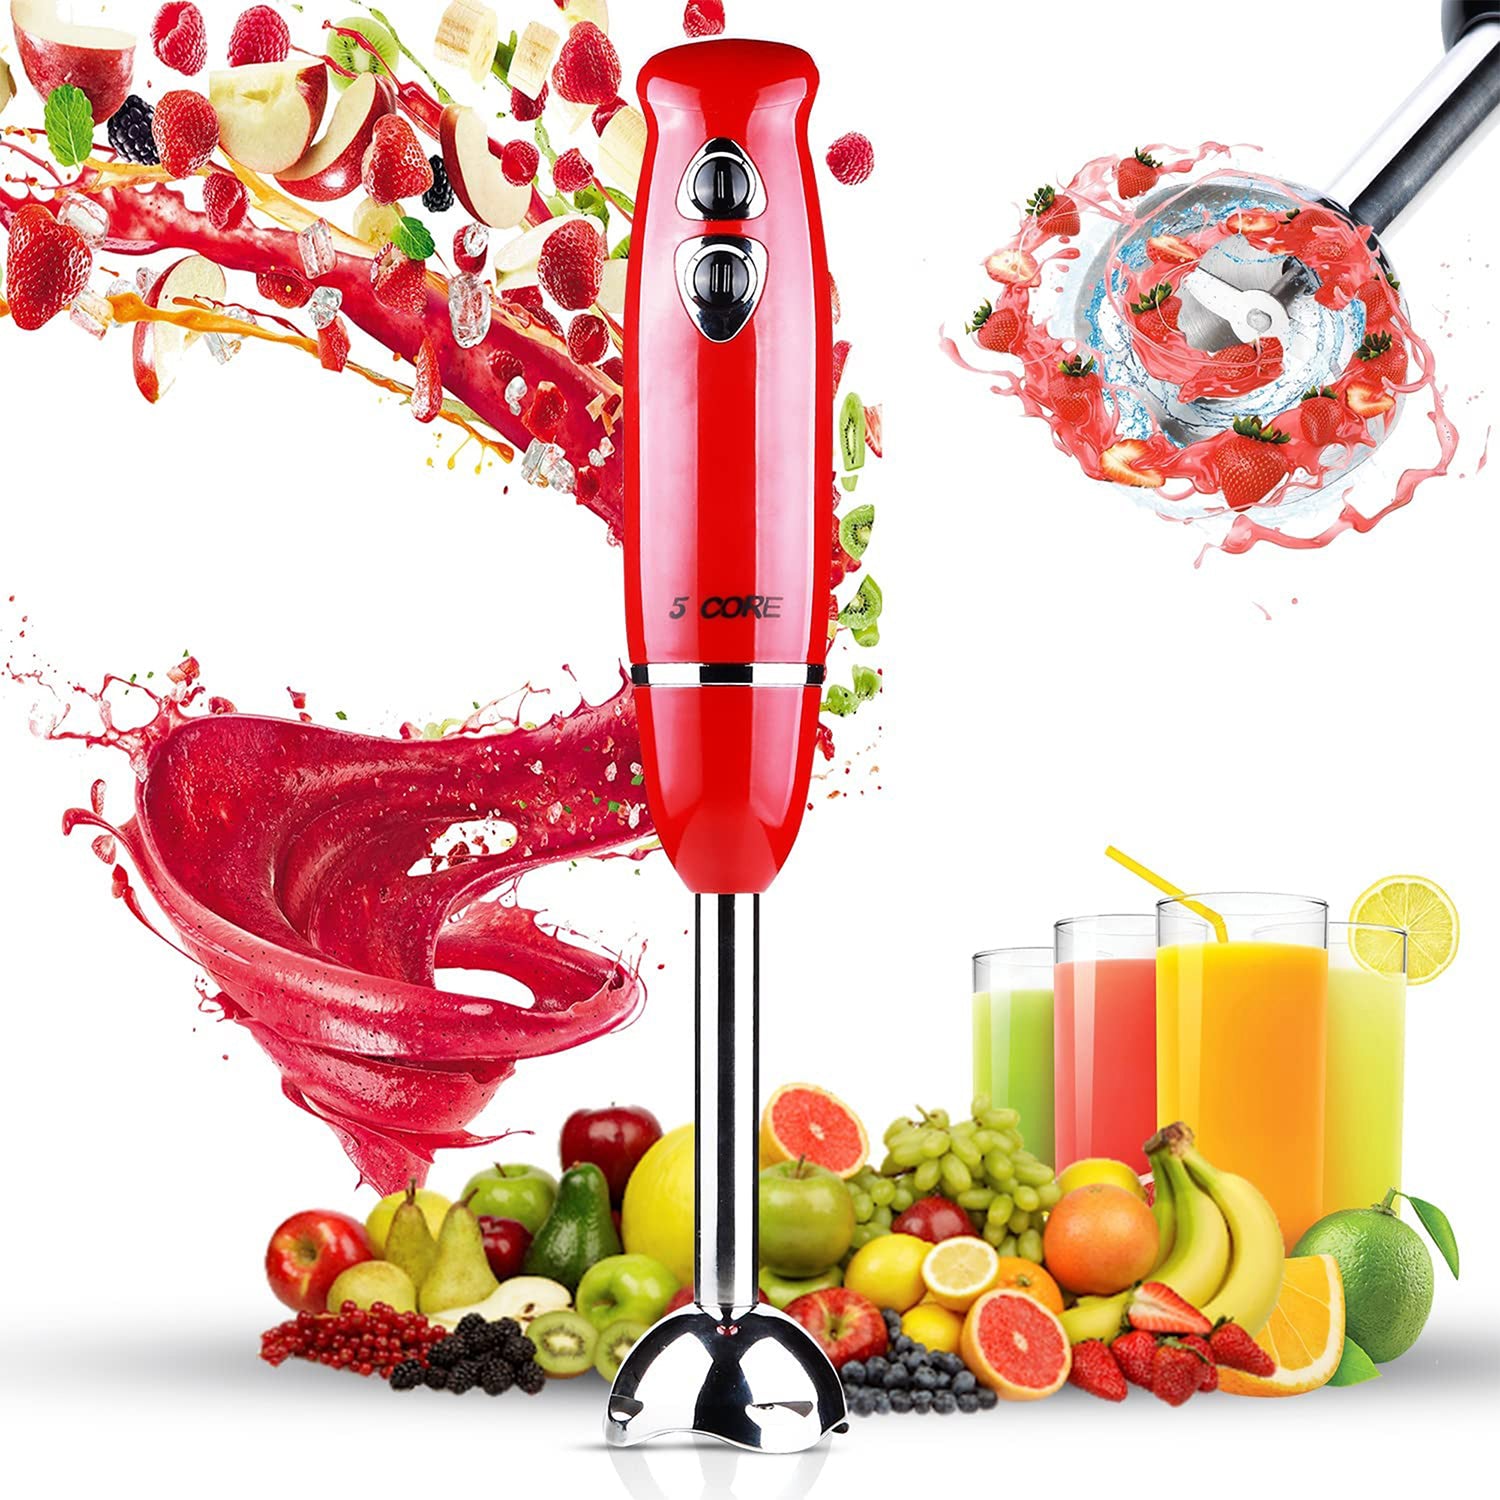 5Core Immersion Hand Blender 500W Electric Handheld Mixer w 2 Mixing Speed for Smoothies Puree